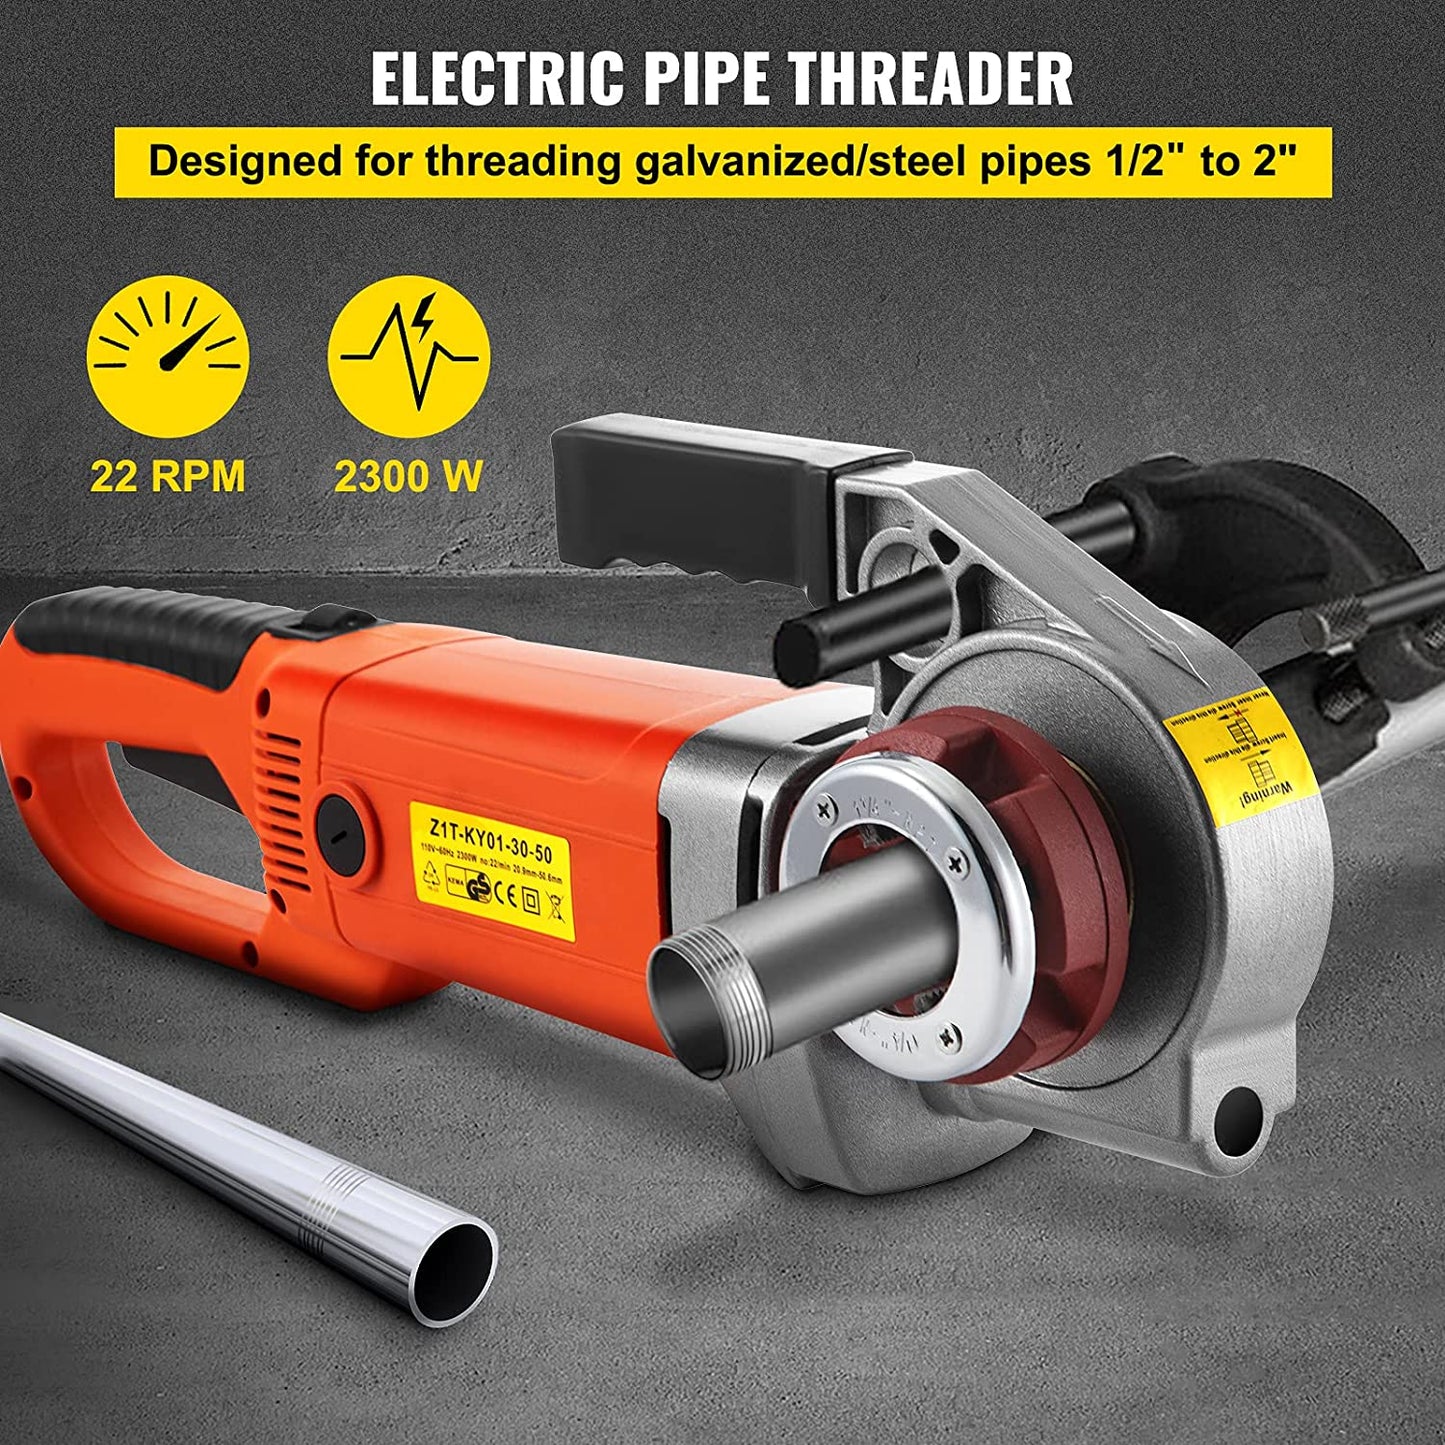 Electric Pipe Threader, 2300W Pipe Threading Machine, Heavy-Duty Hand-Held Power Drive Kit, 110V Pipe Threader Machine Copper Motor, Portable Pipe Threader with 6 Dies 1/2"-2" and Carrying Case